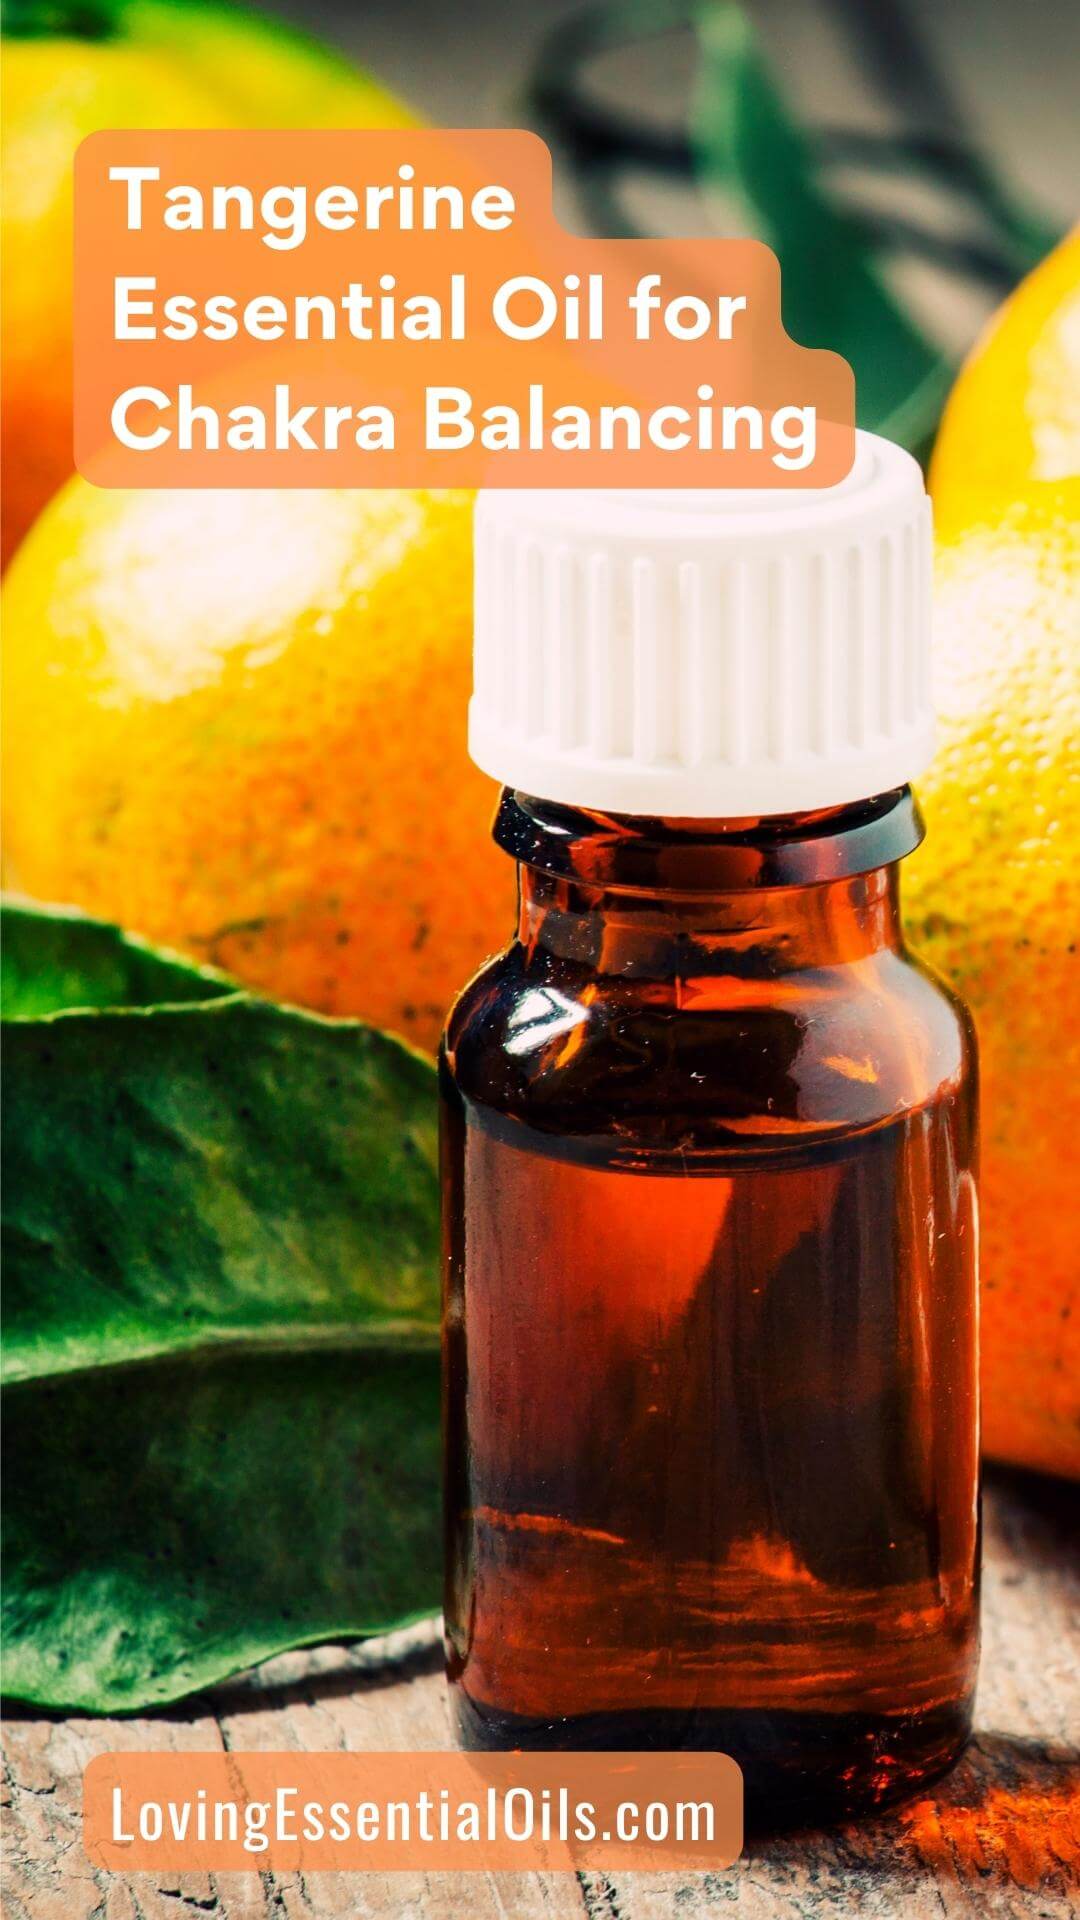 Tangerine Essential Oil for Chakra by Loving Essential Oils